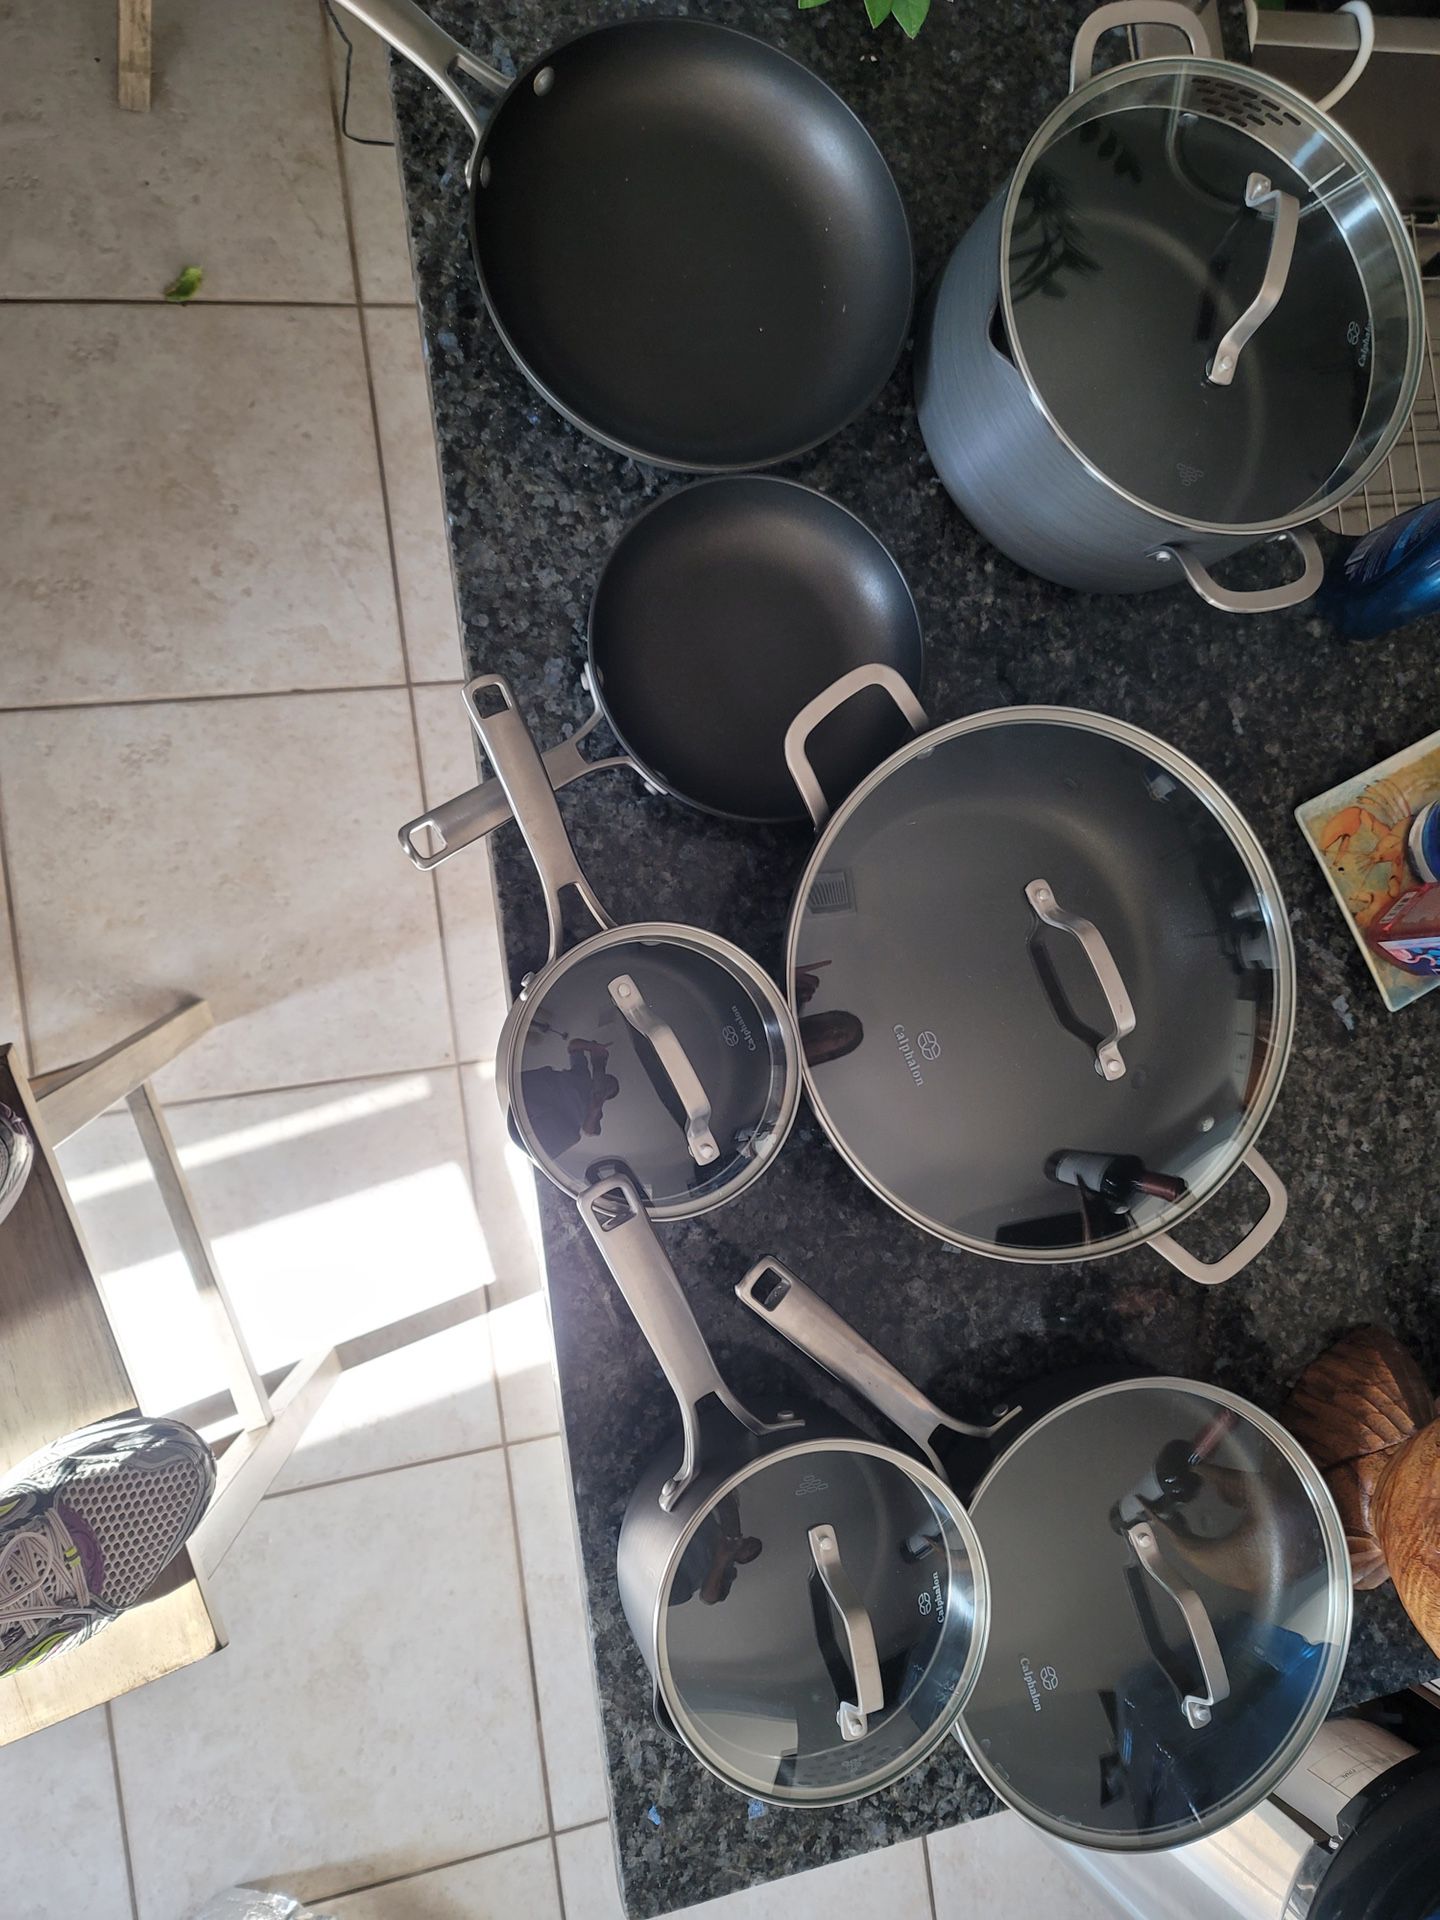 Calphalon pots and pans with strainer lids